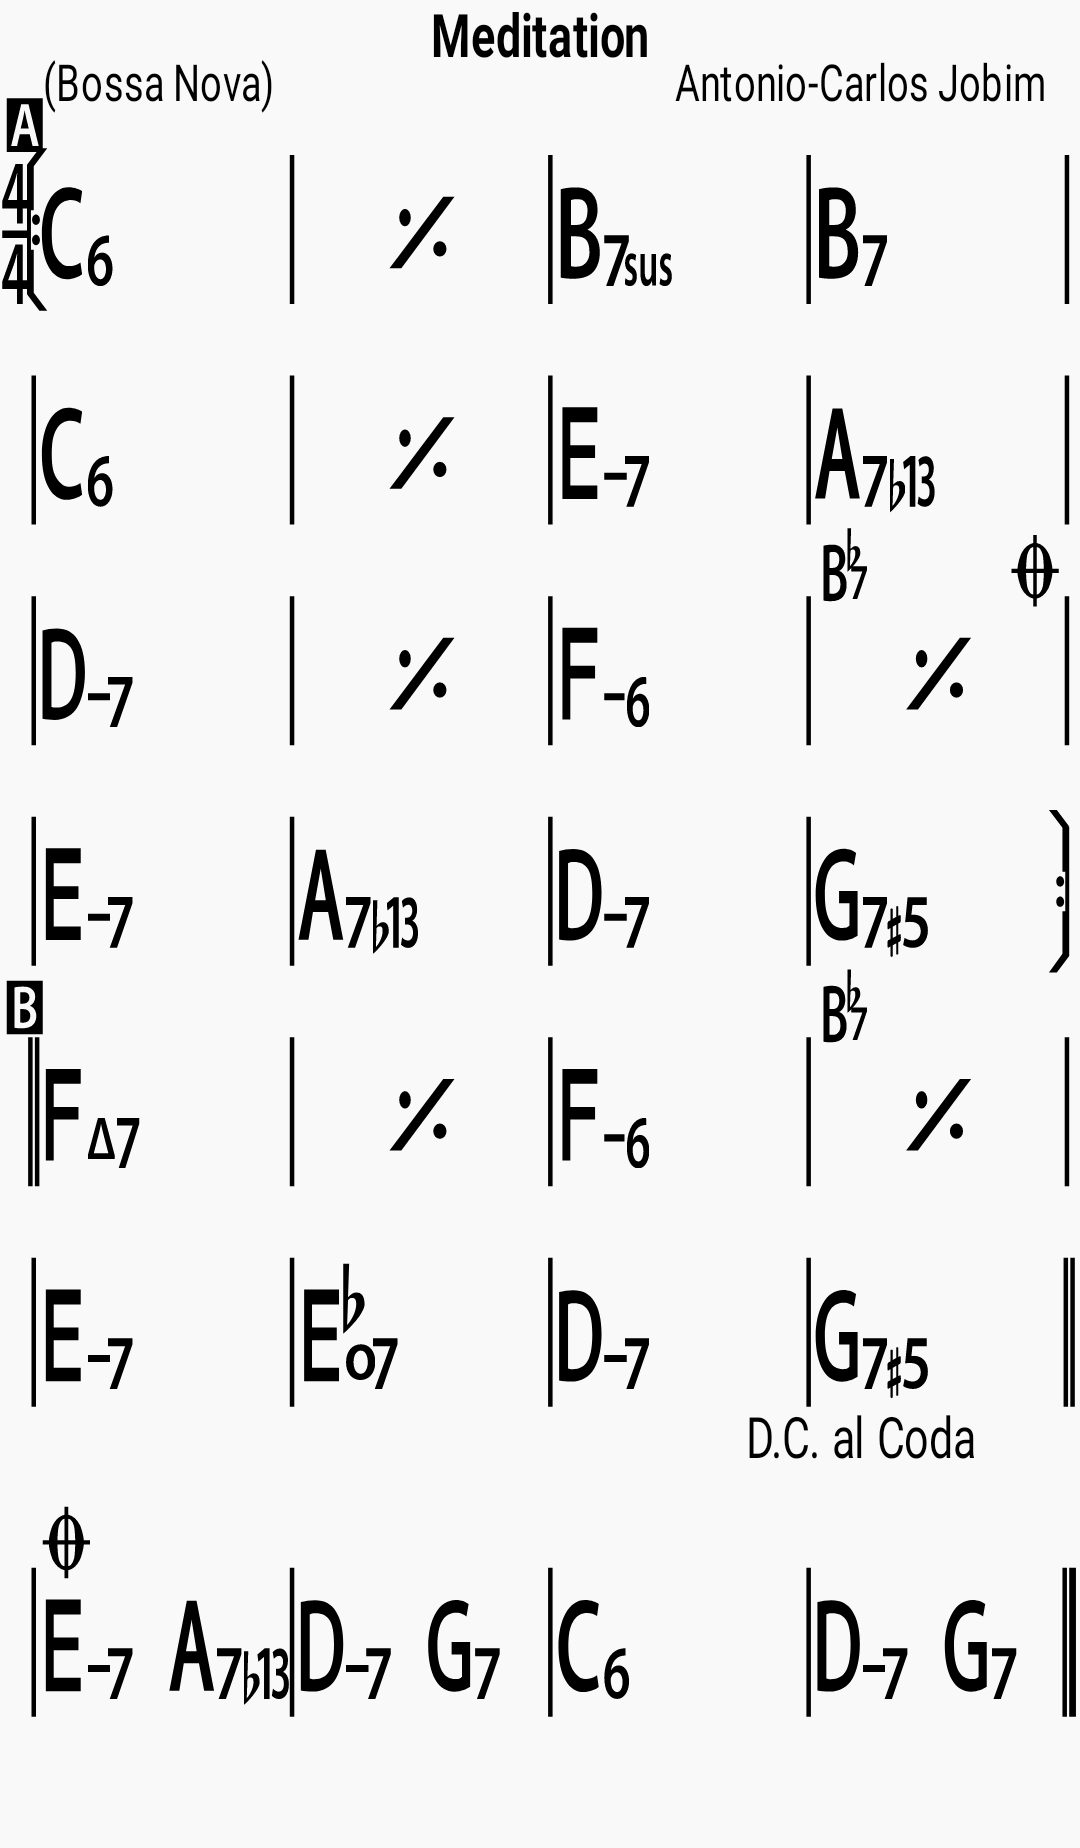 Chord chart for the jazz standard Meditation